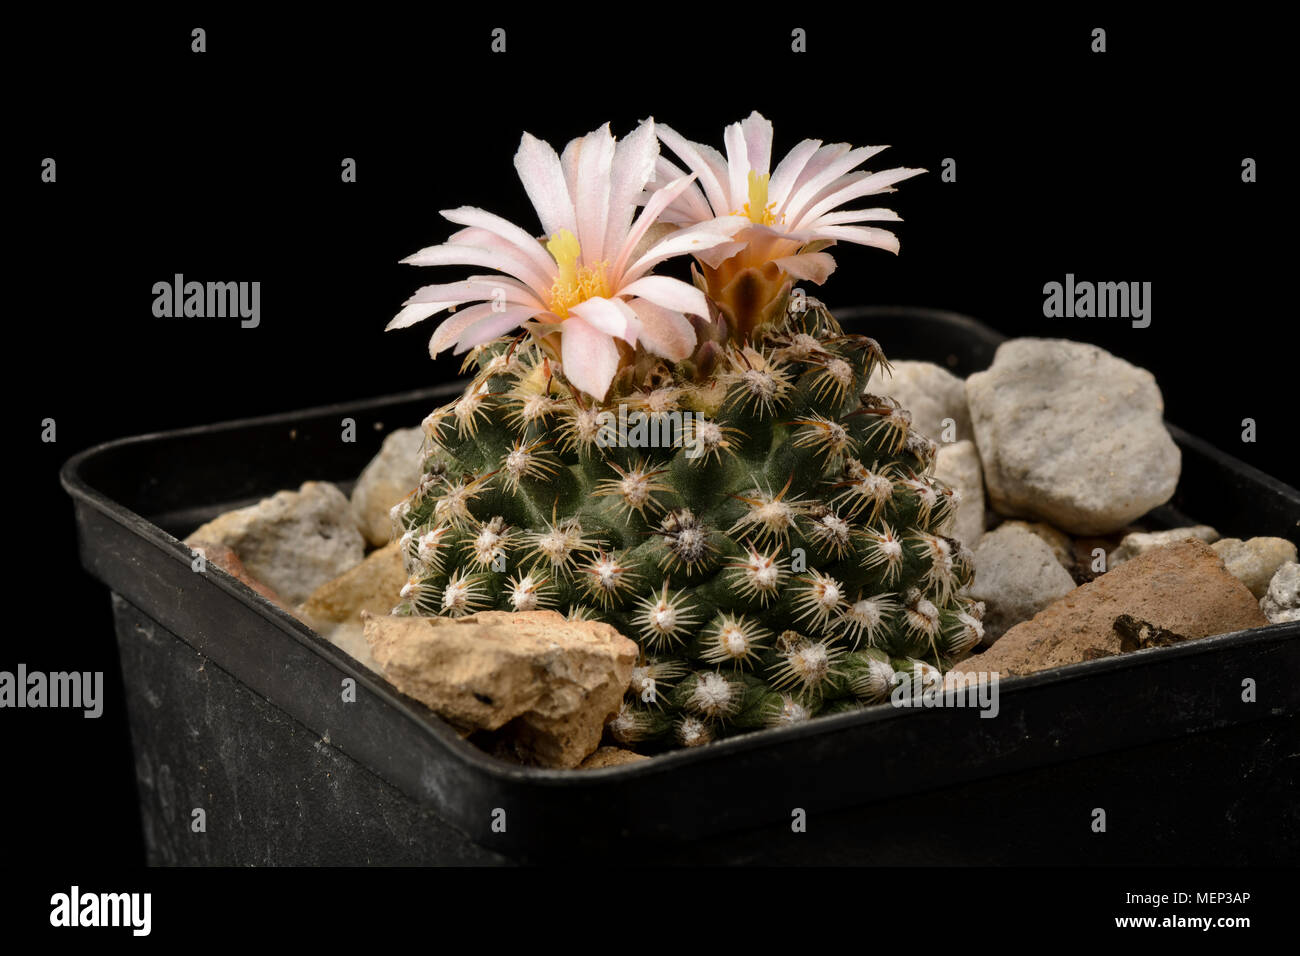 Cactus Pediocactus knowltonii with flower isolated on Black Stock Photo